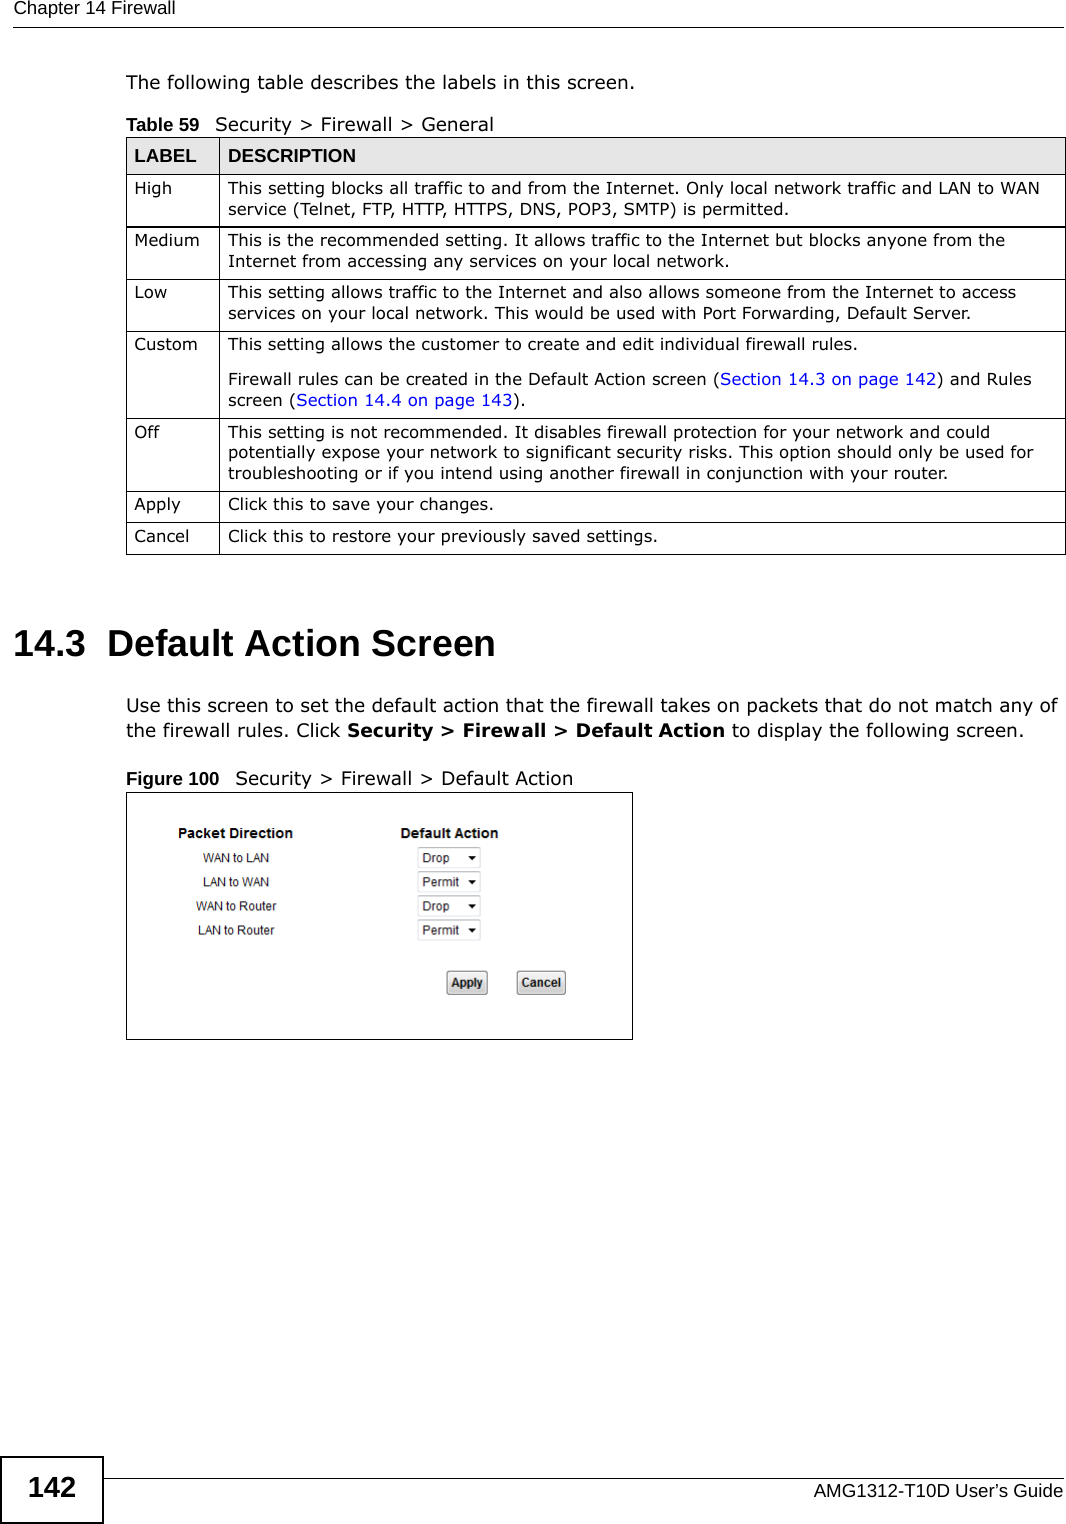 Chapter 14 FirewallAMG1312-T10D User’s Guide142The following table describes the labels in this screen.14.3  Default Action ScreenUse this screen to set the default action that the firewall takes on packets that do not match any of the firewall rules. Click Security &gt; Firewall &gt; Default Action to display the following screen.Figure 100   Security &gt; Firewall &gt; Default Action Table 59   Security &gt; Firewall &gt; GeneralLABEL DESCRIPTIONHigh This setting blocks all traffic to and from the Internet. Only local network traffic and LAN to WAN service (Telnet, FTP, HTTP, HTTPS, DNS, POP3, SMTP) is permitted. Medium This is the recommended setting. It allows traffic to the Internet but blocks anyone from the Internet from accessing any services on your local network. Low This setting allows traffic to the Internet and also allows someone from the Internet to access services on your local network. This would be used with Port Forwarding, Default Server. Custom This setting allows the customer to create and edit individual firewall rules. Firewall rules can be created in the Default Action screen (Section 14.3 on page 142) and Rules screen (Section 14.4 on page 143).Off This setting is not recommended. It disables firewall protection for your network and could potentially expose your network to significant security risks. This option should only be used for troubleshooting or if you intend using another firewall in conjunction with your router.Apply Click this to save your changes.Cancel Click this to restore your previously saved settings.